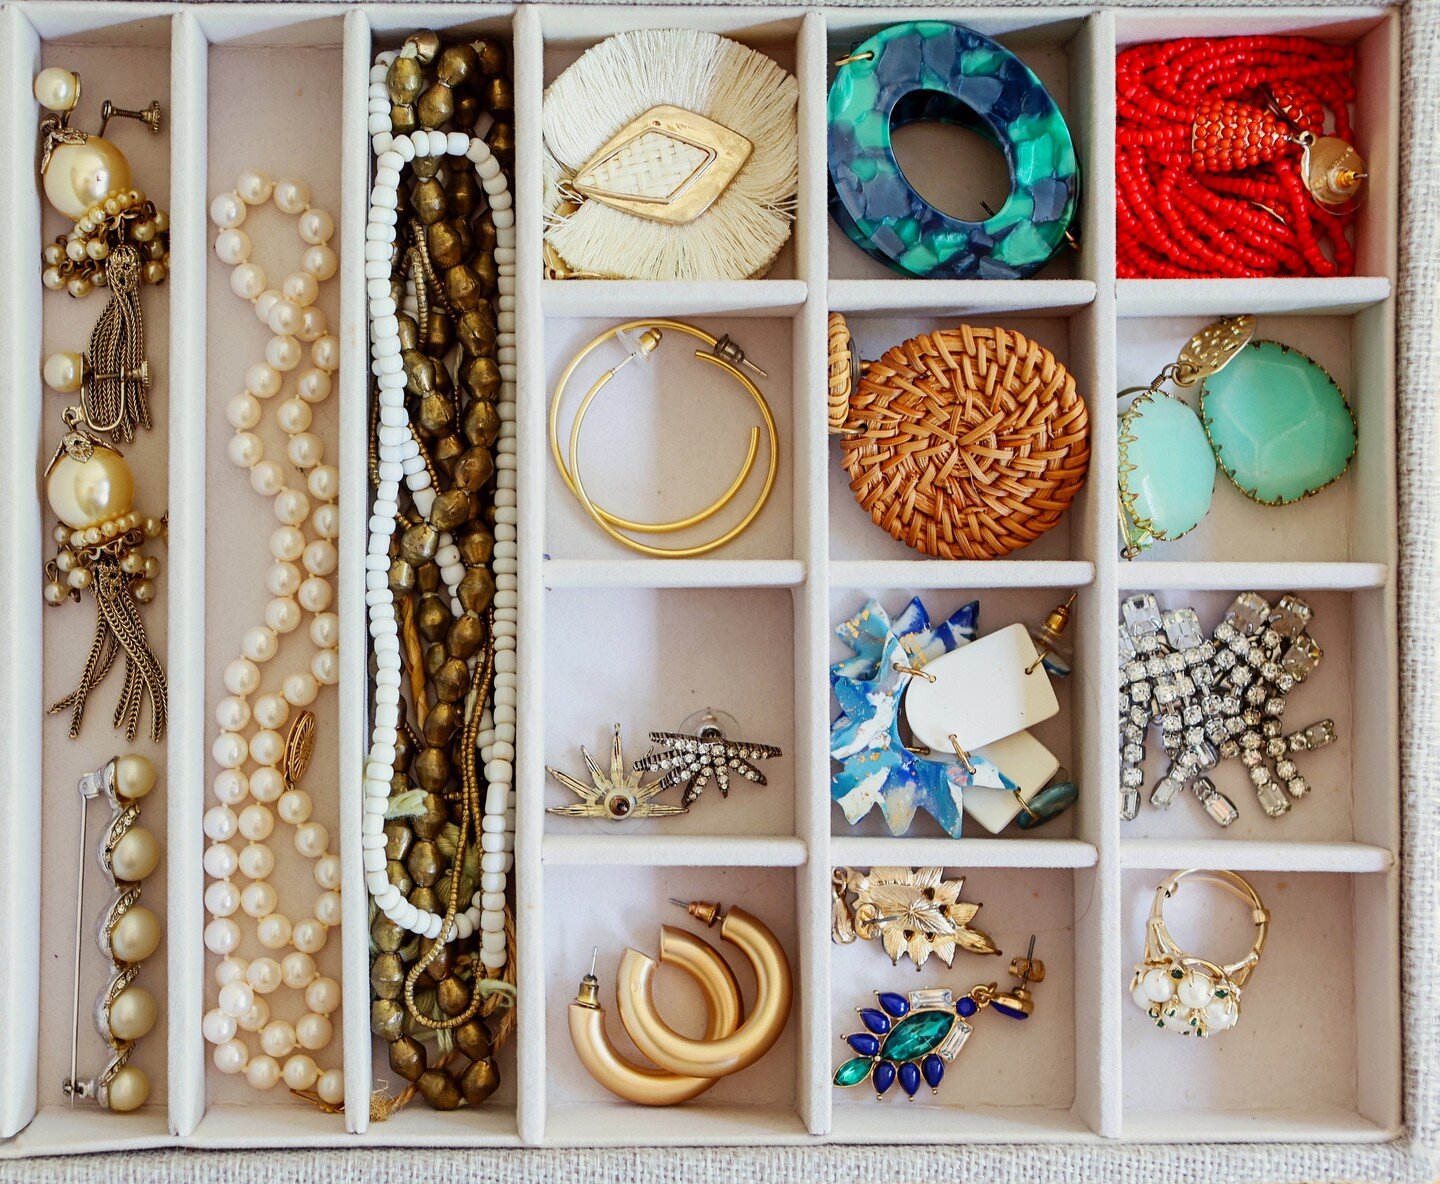 Can you SEE everything that you own? If you can't easily access it, what is the point of owning it? We love jewelry organizers like this. No need to shop for more when you love what you already own and enjoy shopping in your own closet!

Photo by @ra